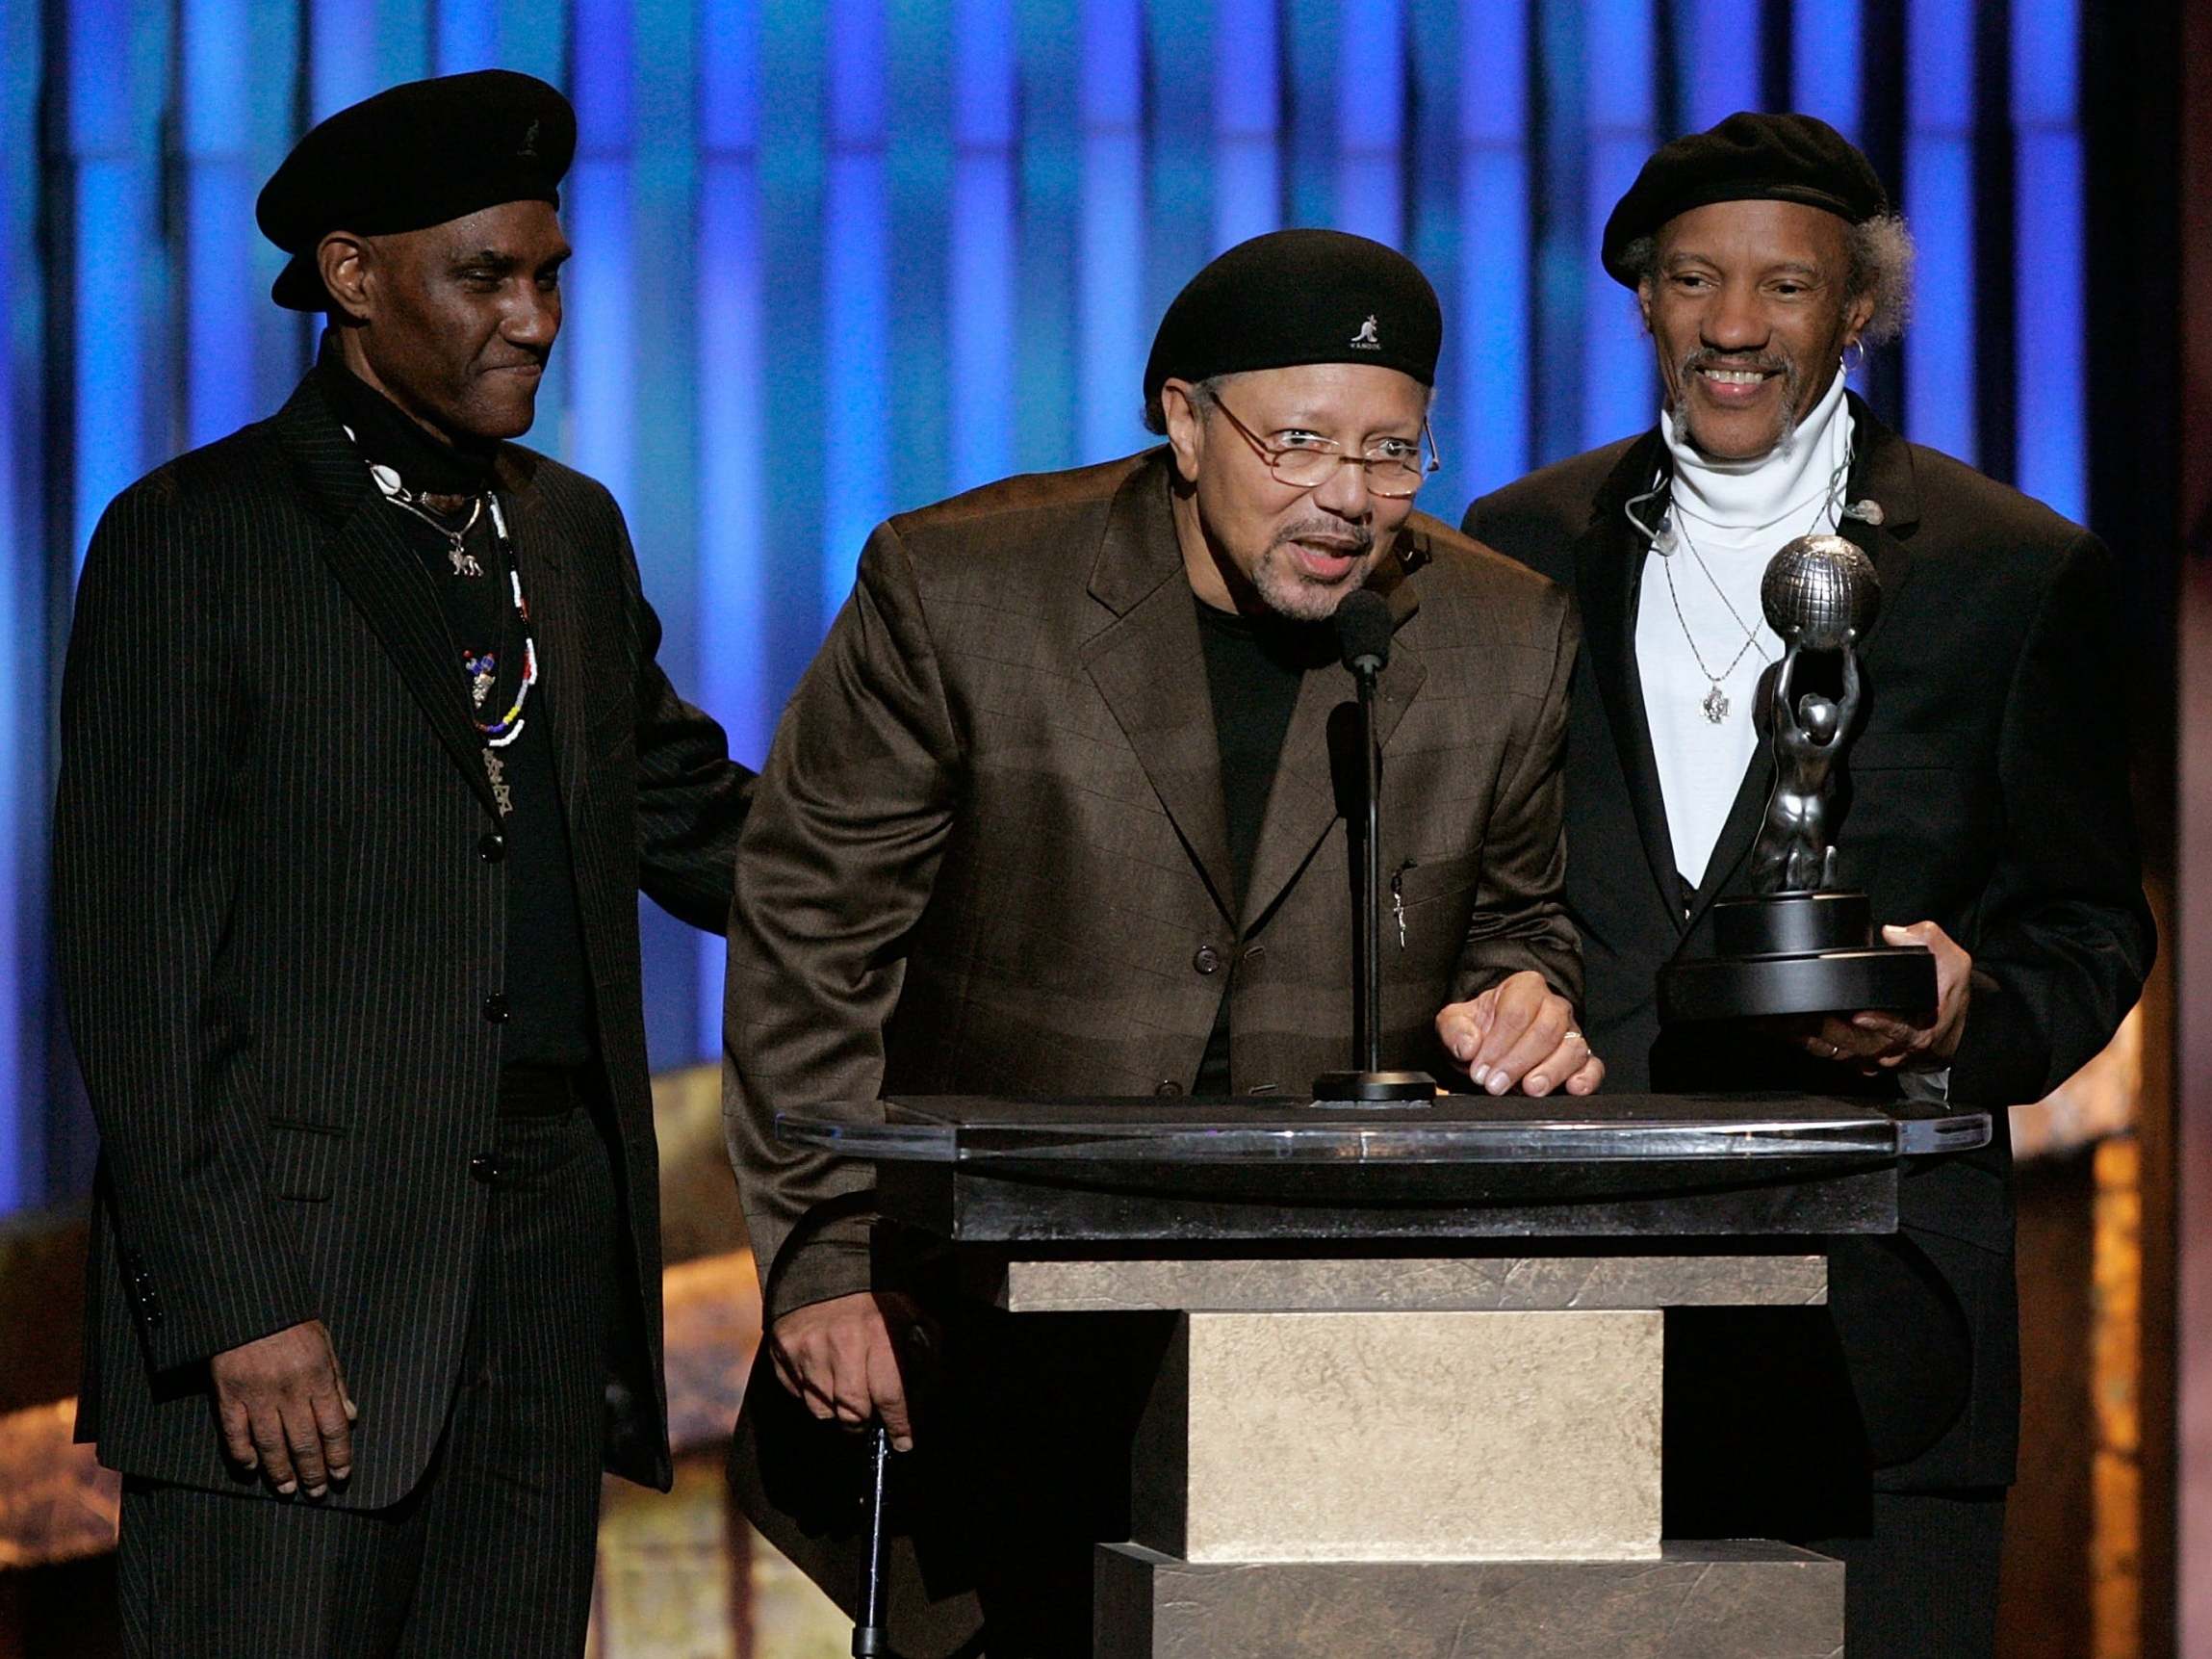 Art (centre) with brothers Cyril (left) and Charles accepting the NAACP Chairman’s Award at LA’s Shrine Auditorium in February 2006